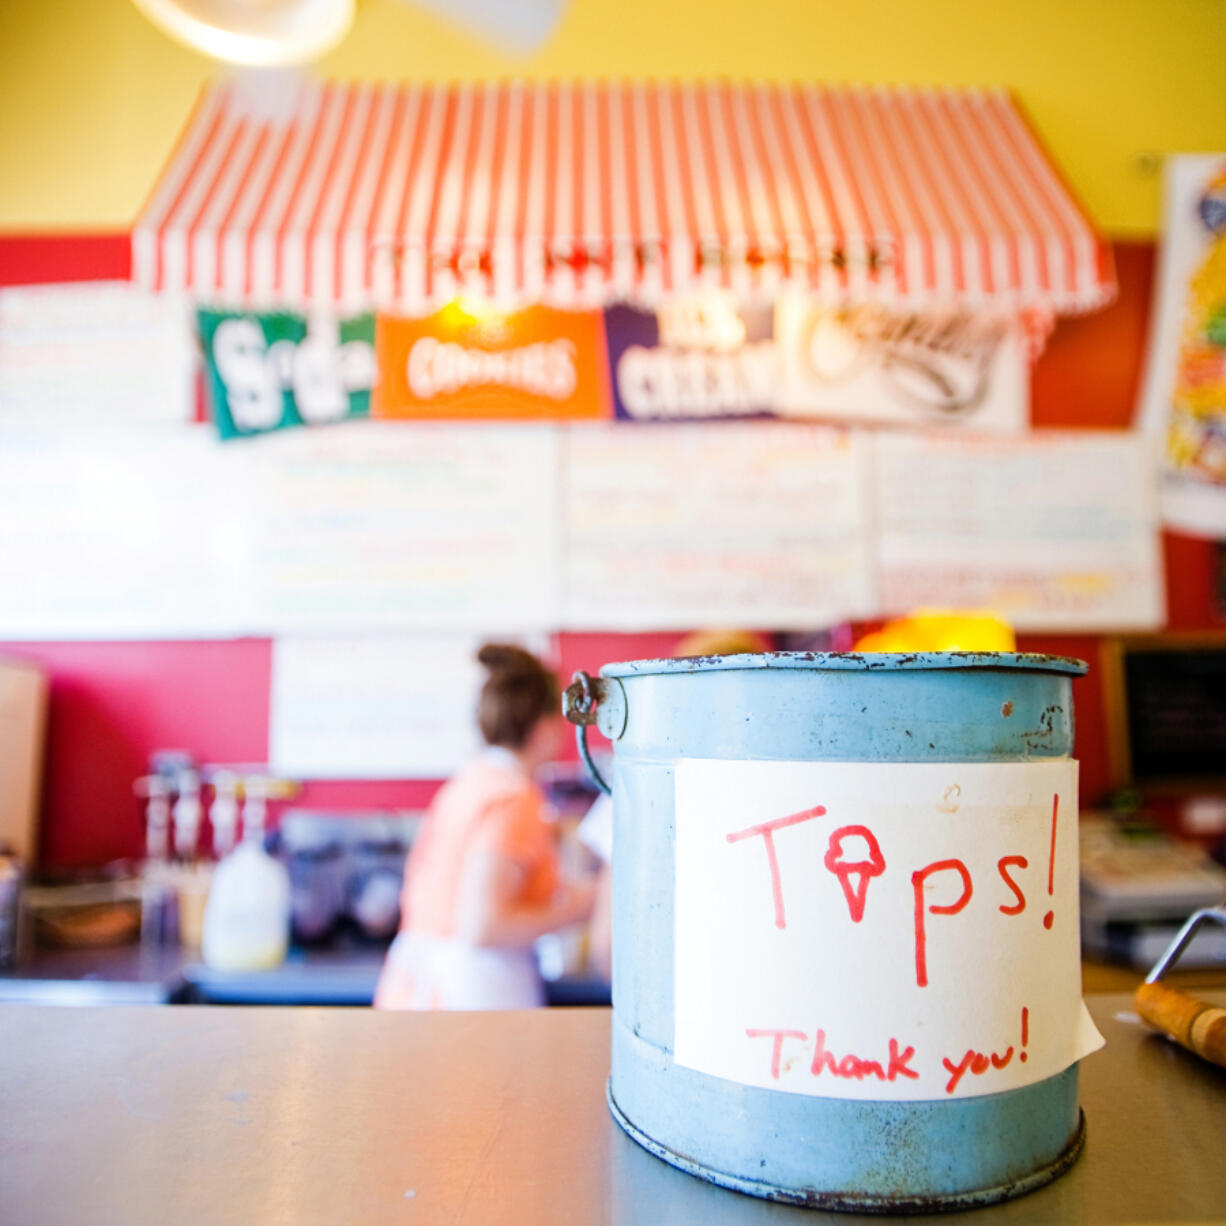 Service charges are separate from tips, sometimes causing confusion once the check arrives.